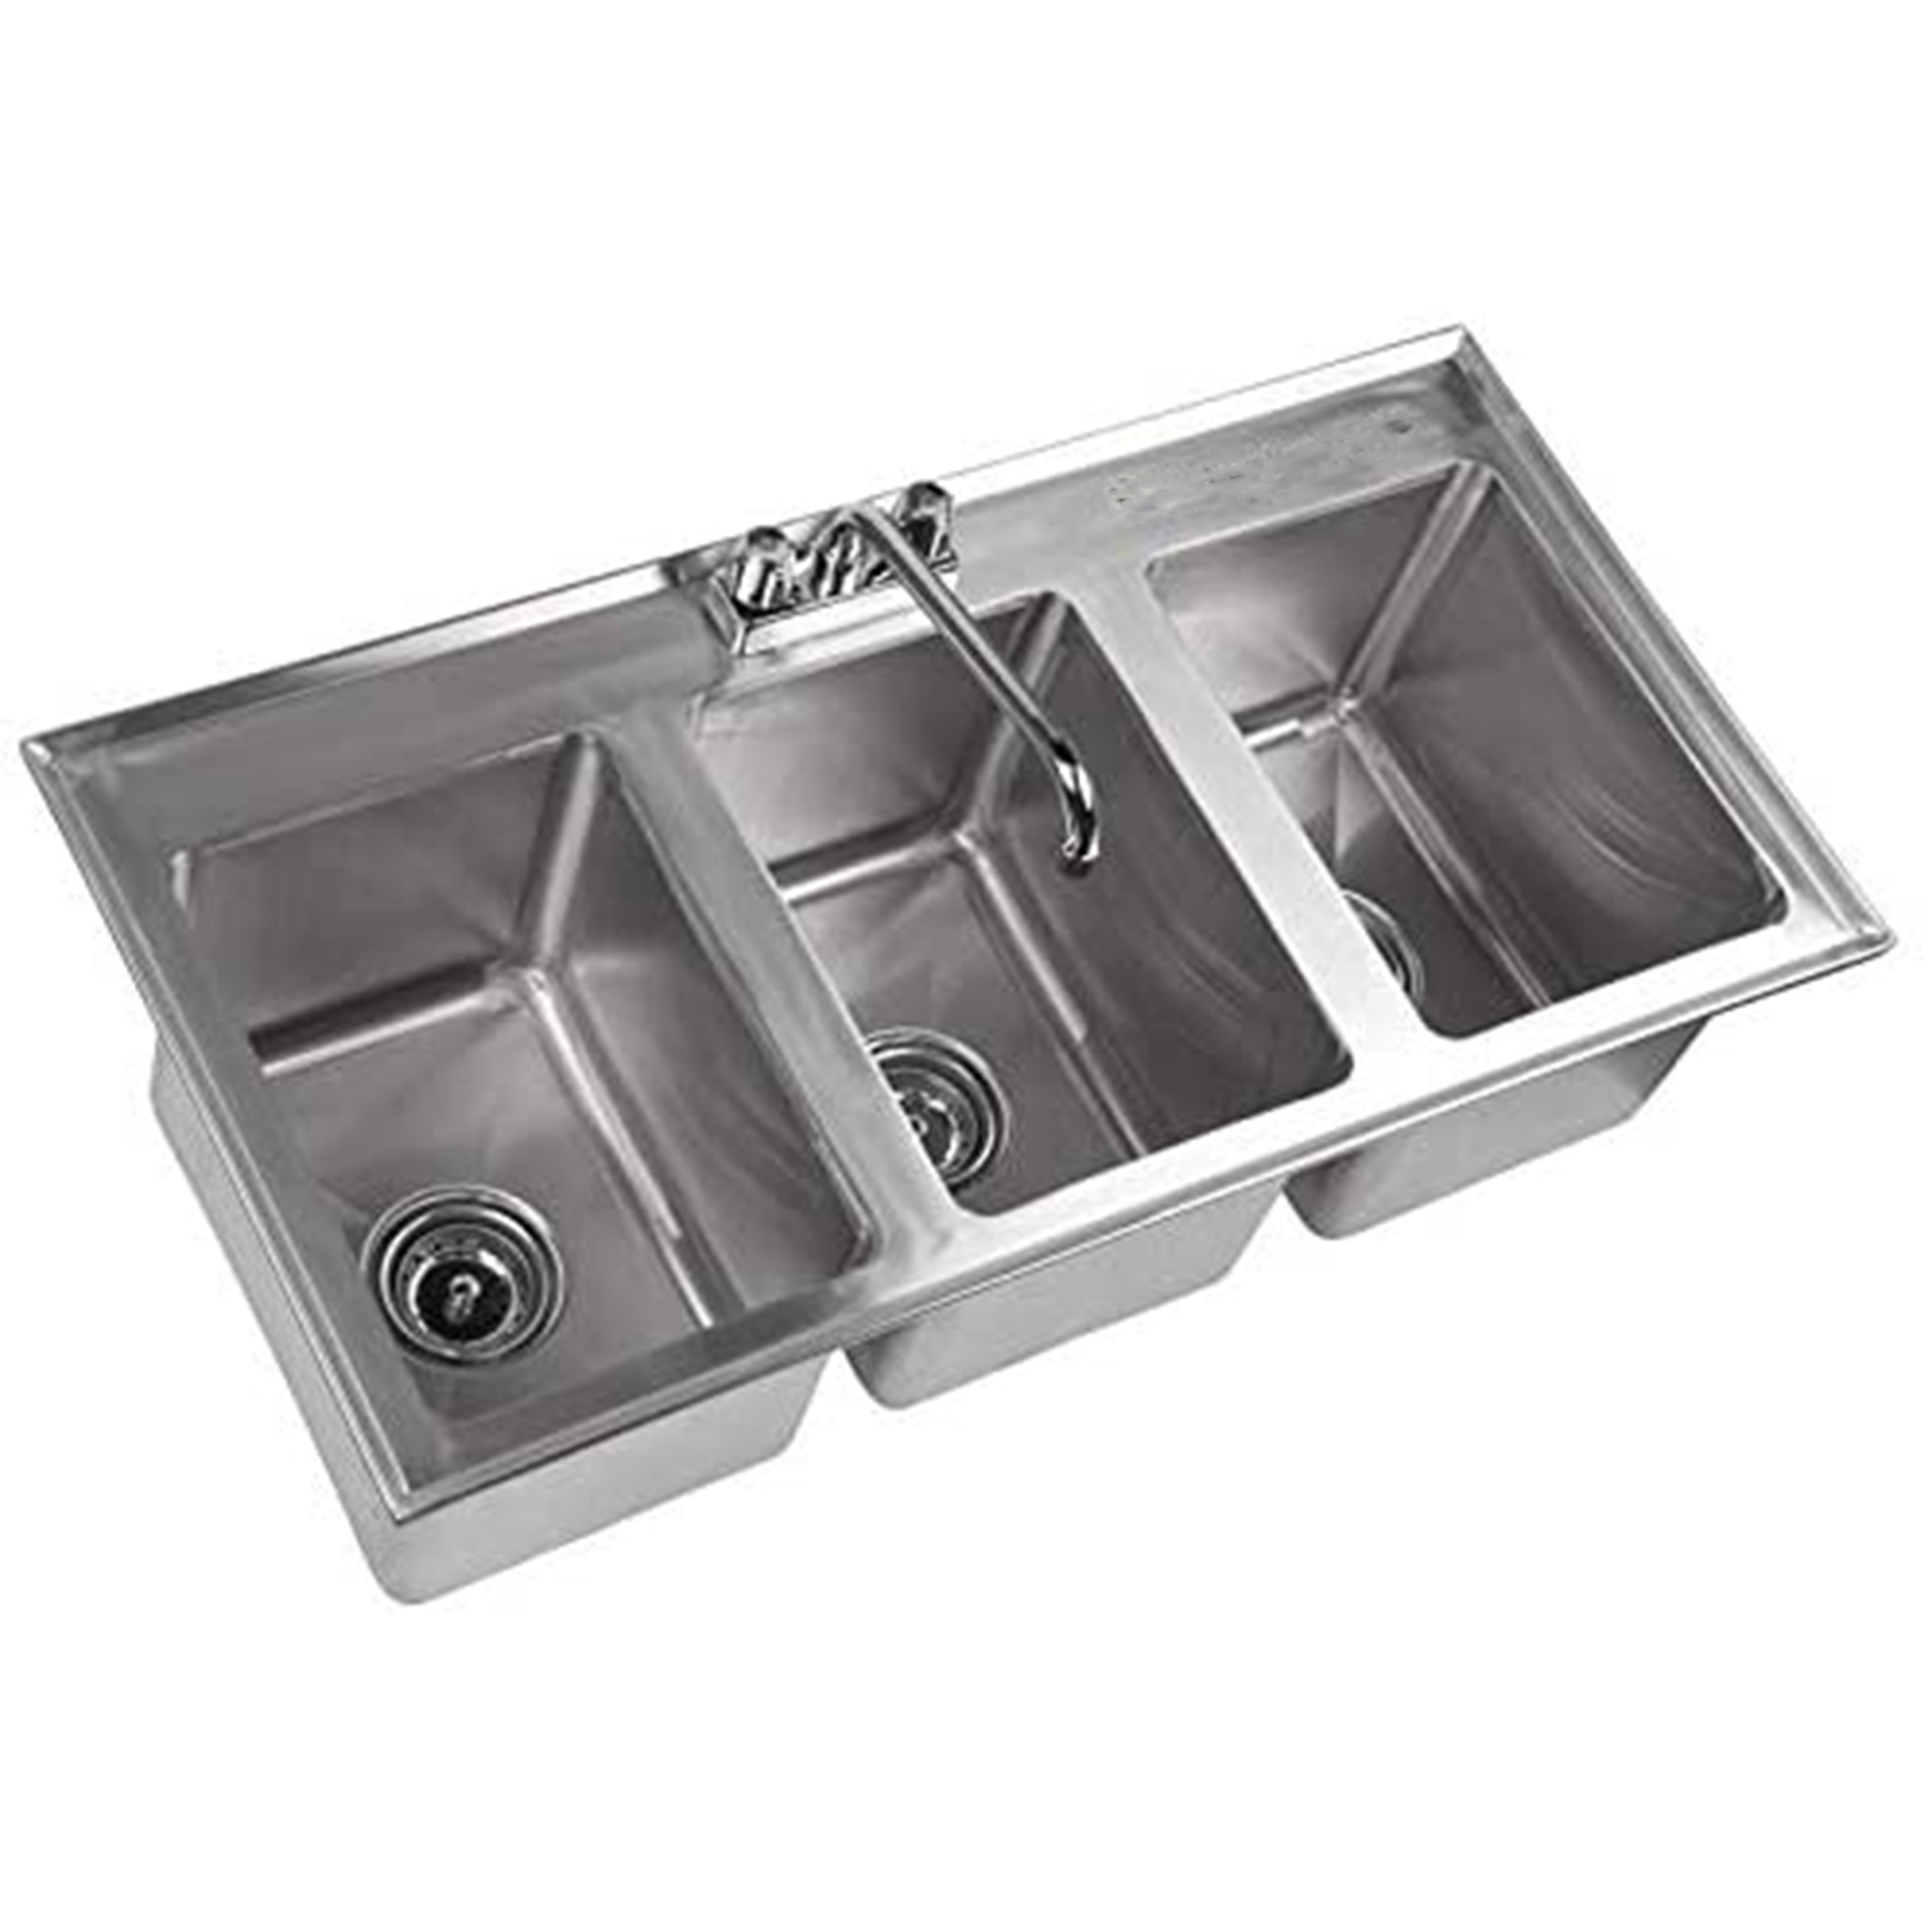 "3-Compartment 37""L x 19""W Stainless Steel Kitchen Drop-In Sink 10"" x 14"" x 10"" stainless steel 3 compartment drop-in sink!" - image 1 of 4